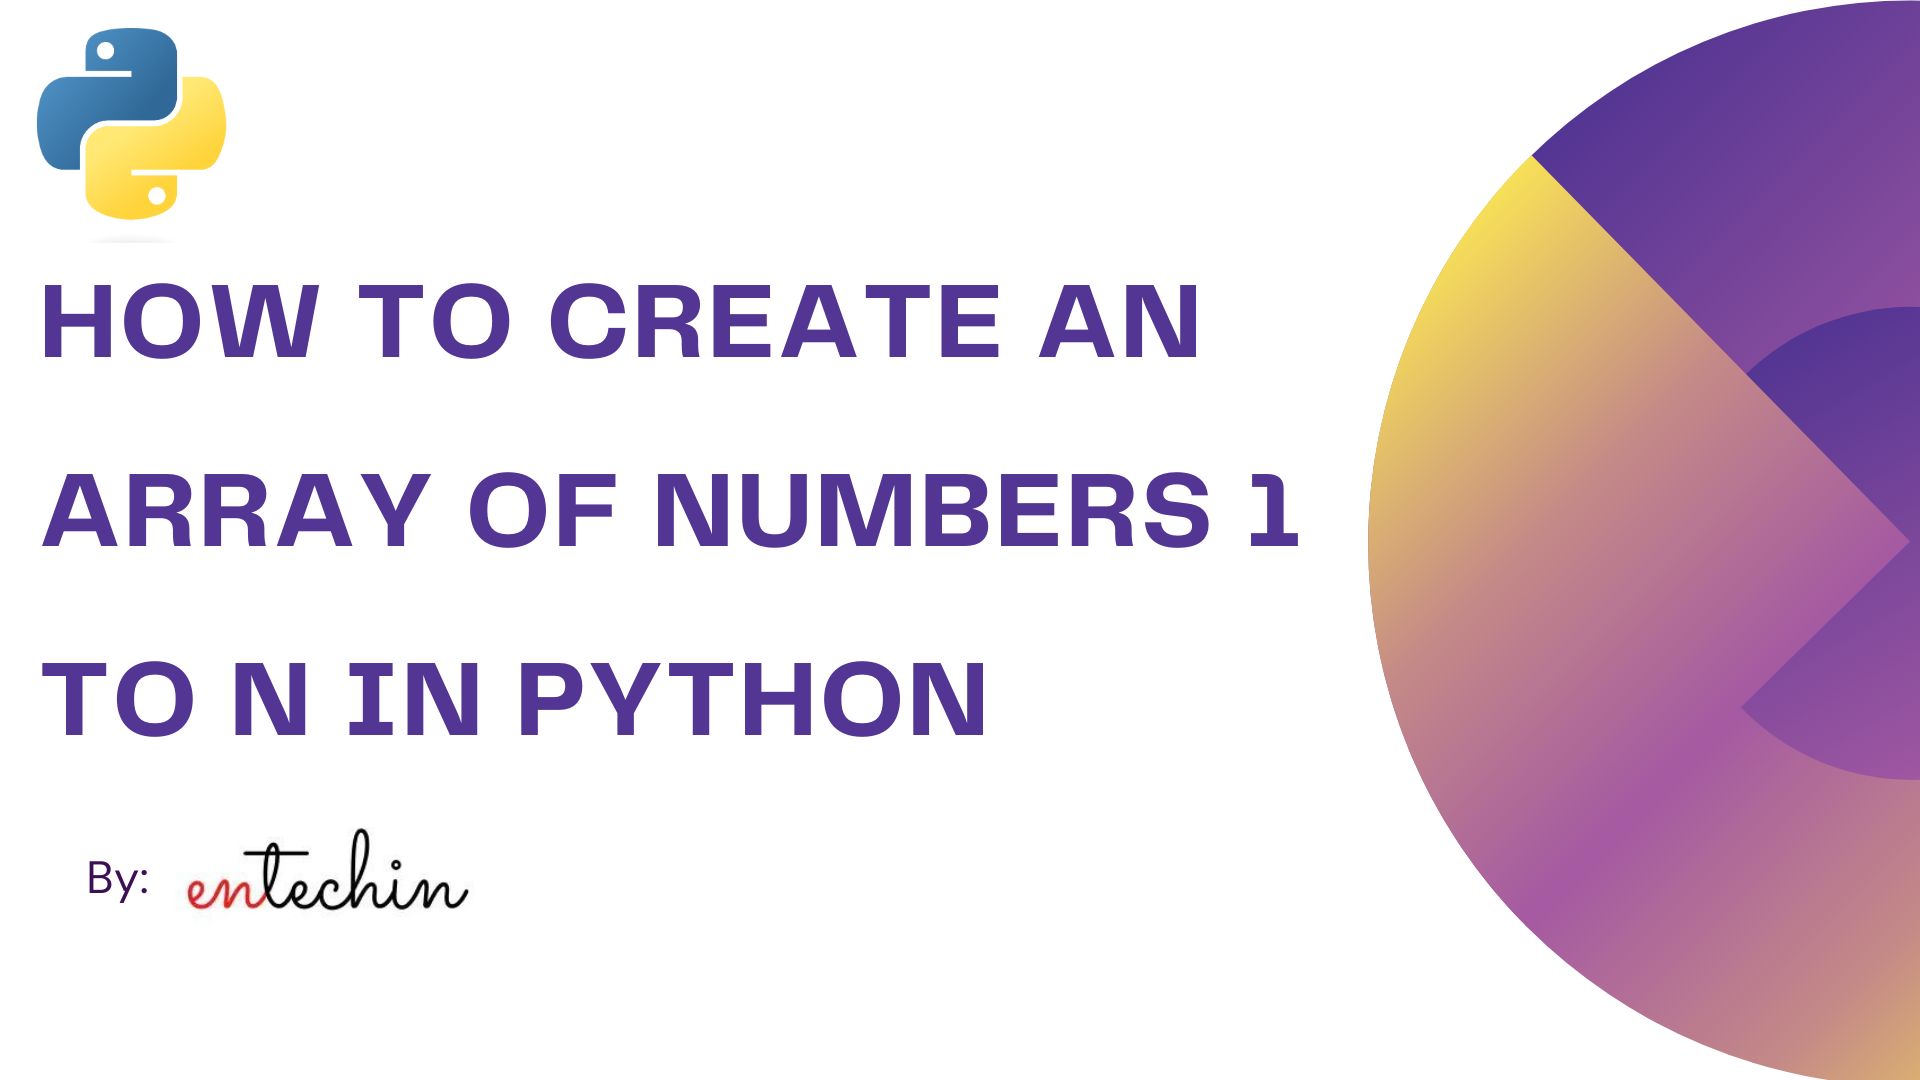 How to create an array of numbers 1 to N in python